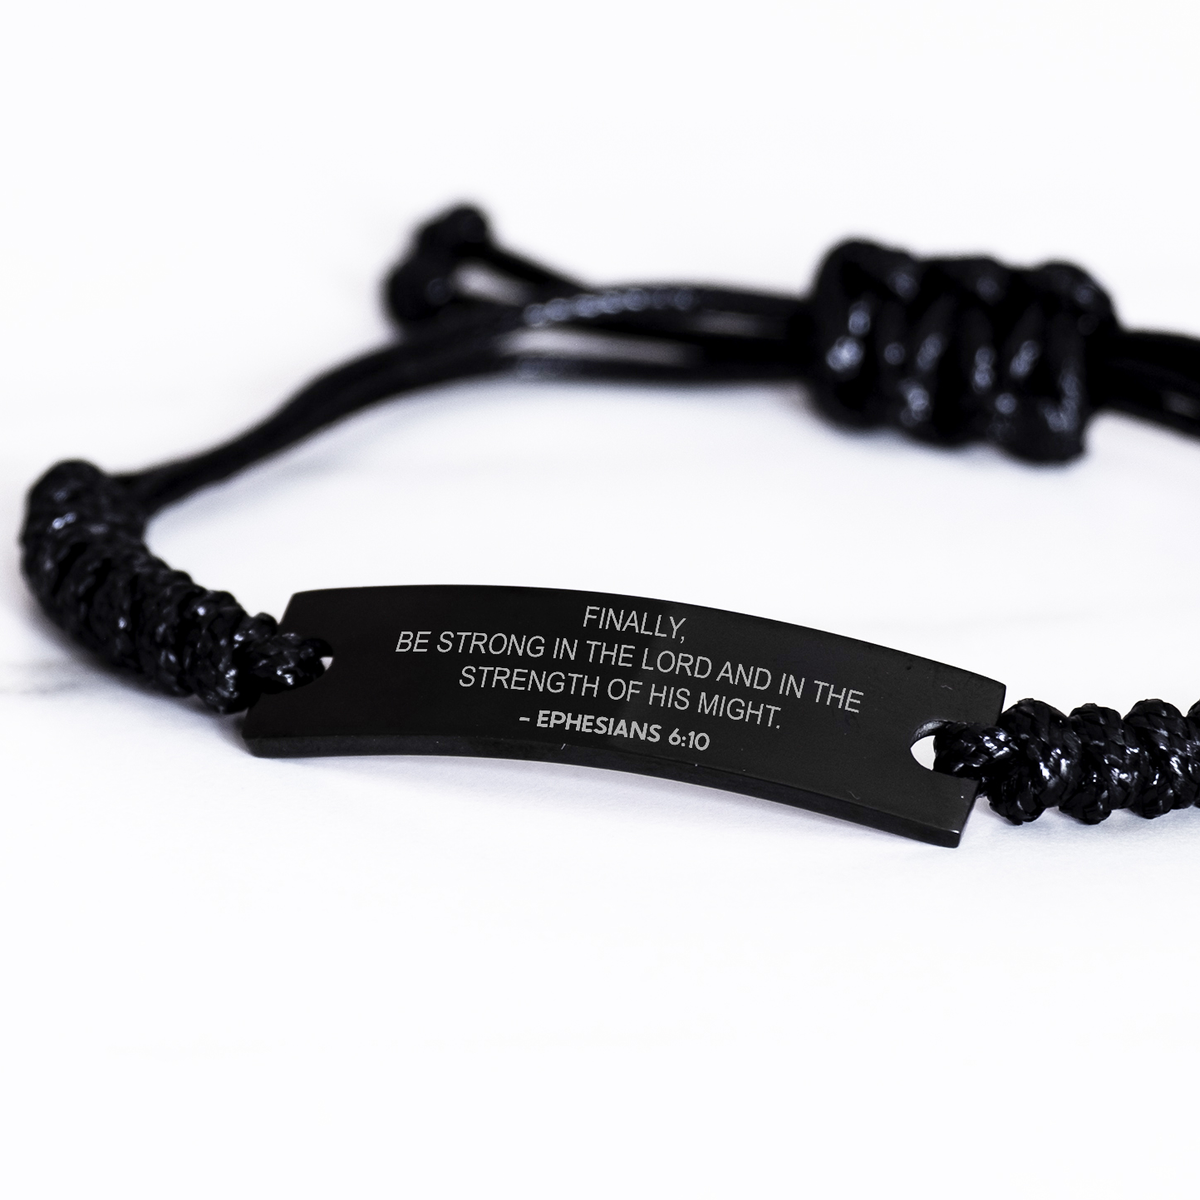 Bible Verse Rope Bracelet, Ephesians 6:10 Finally, Be Strong In The Lord, Christian Encouraging Gifts For Men Women Boys Girls